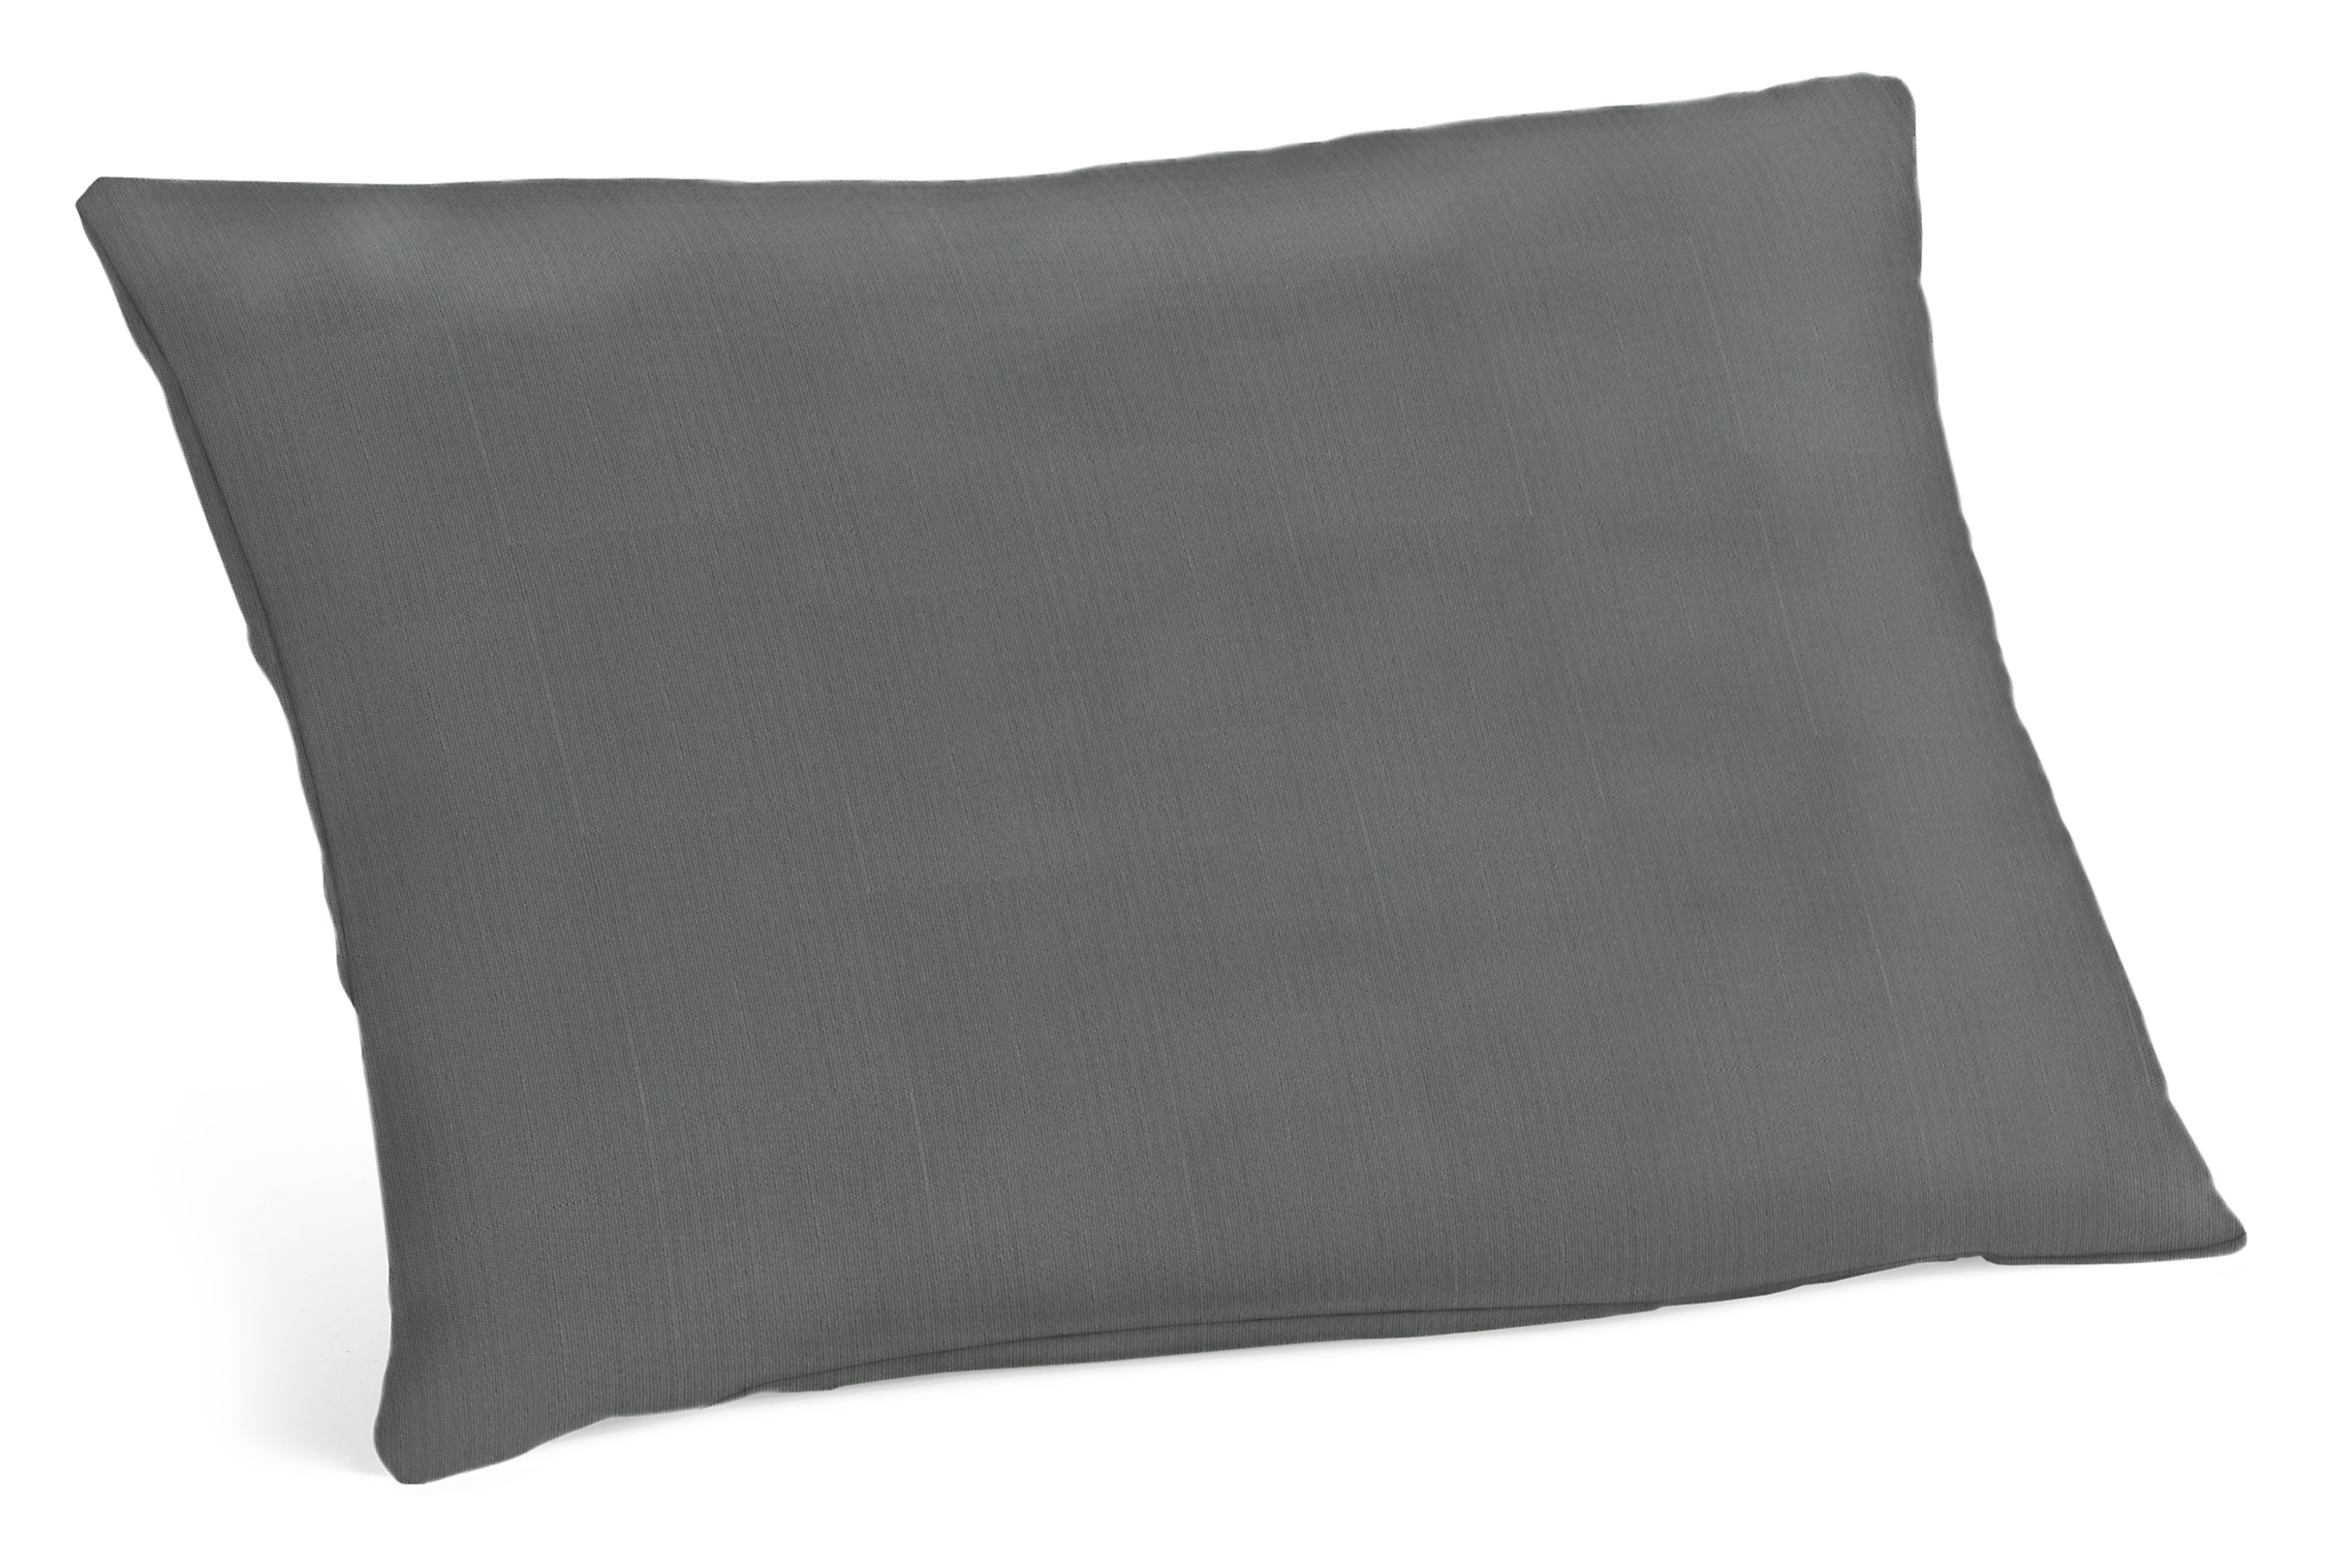 Hue 20w 13h Outdoor Pillow in Sunbrella Canvas Charcoal